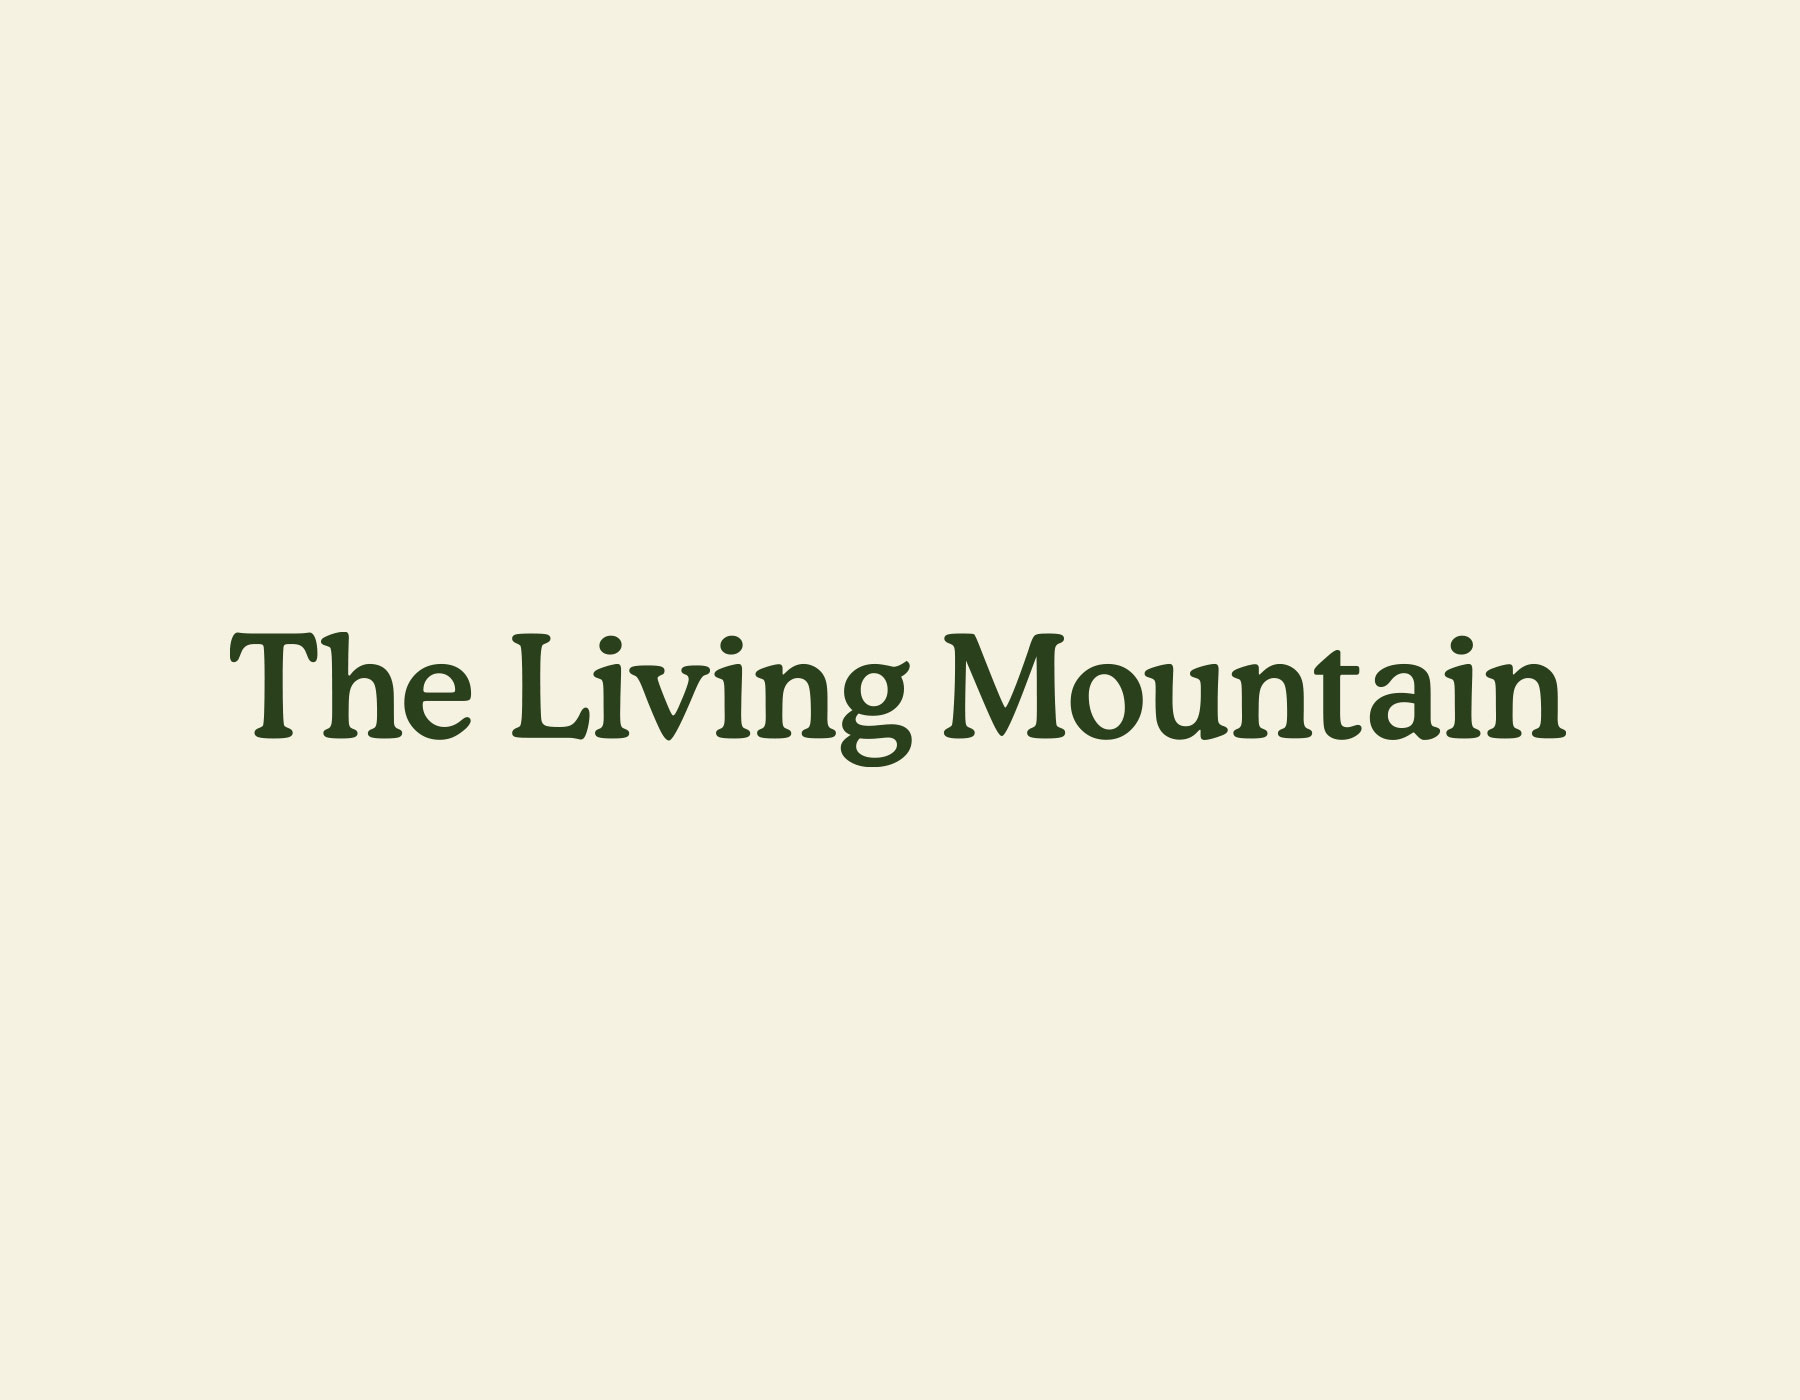 The Living Mountain identity by Colour Format